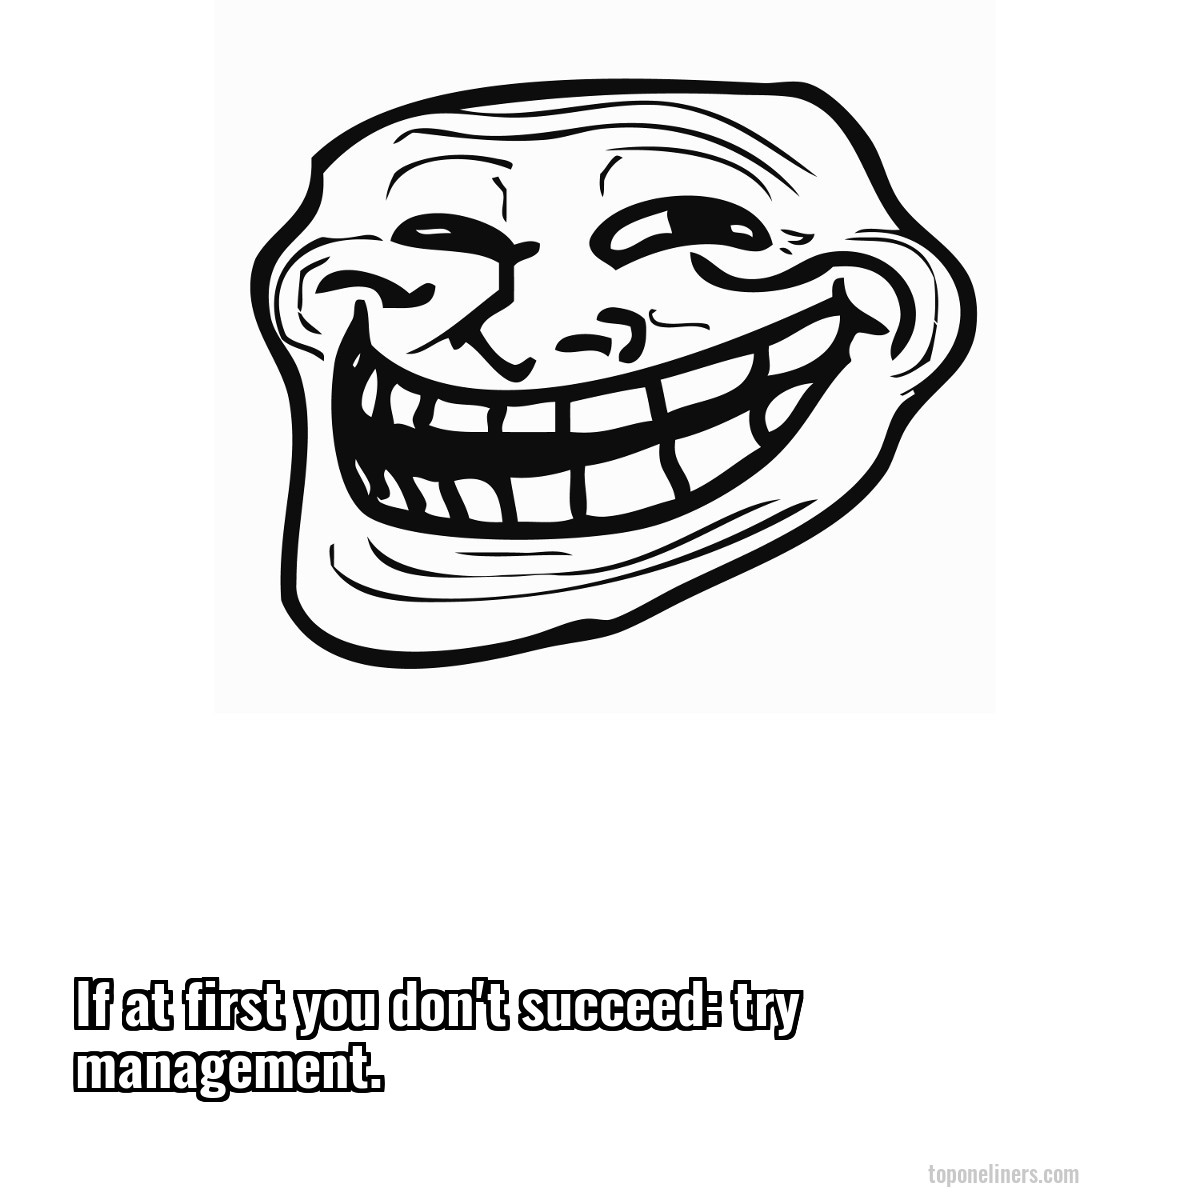 If at first you don't succeed: try management.
